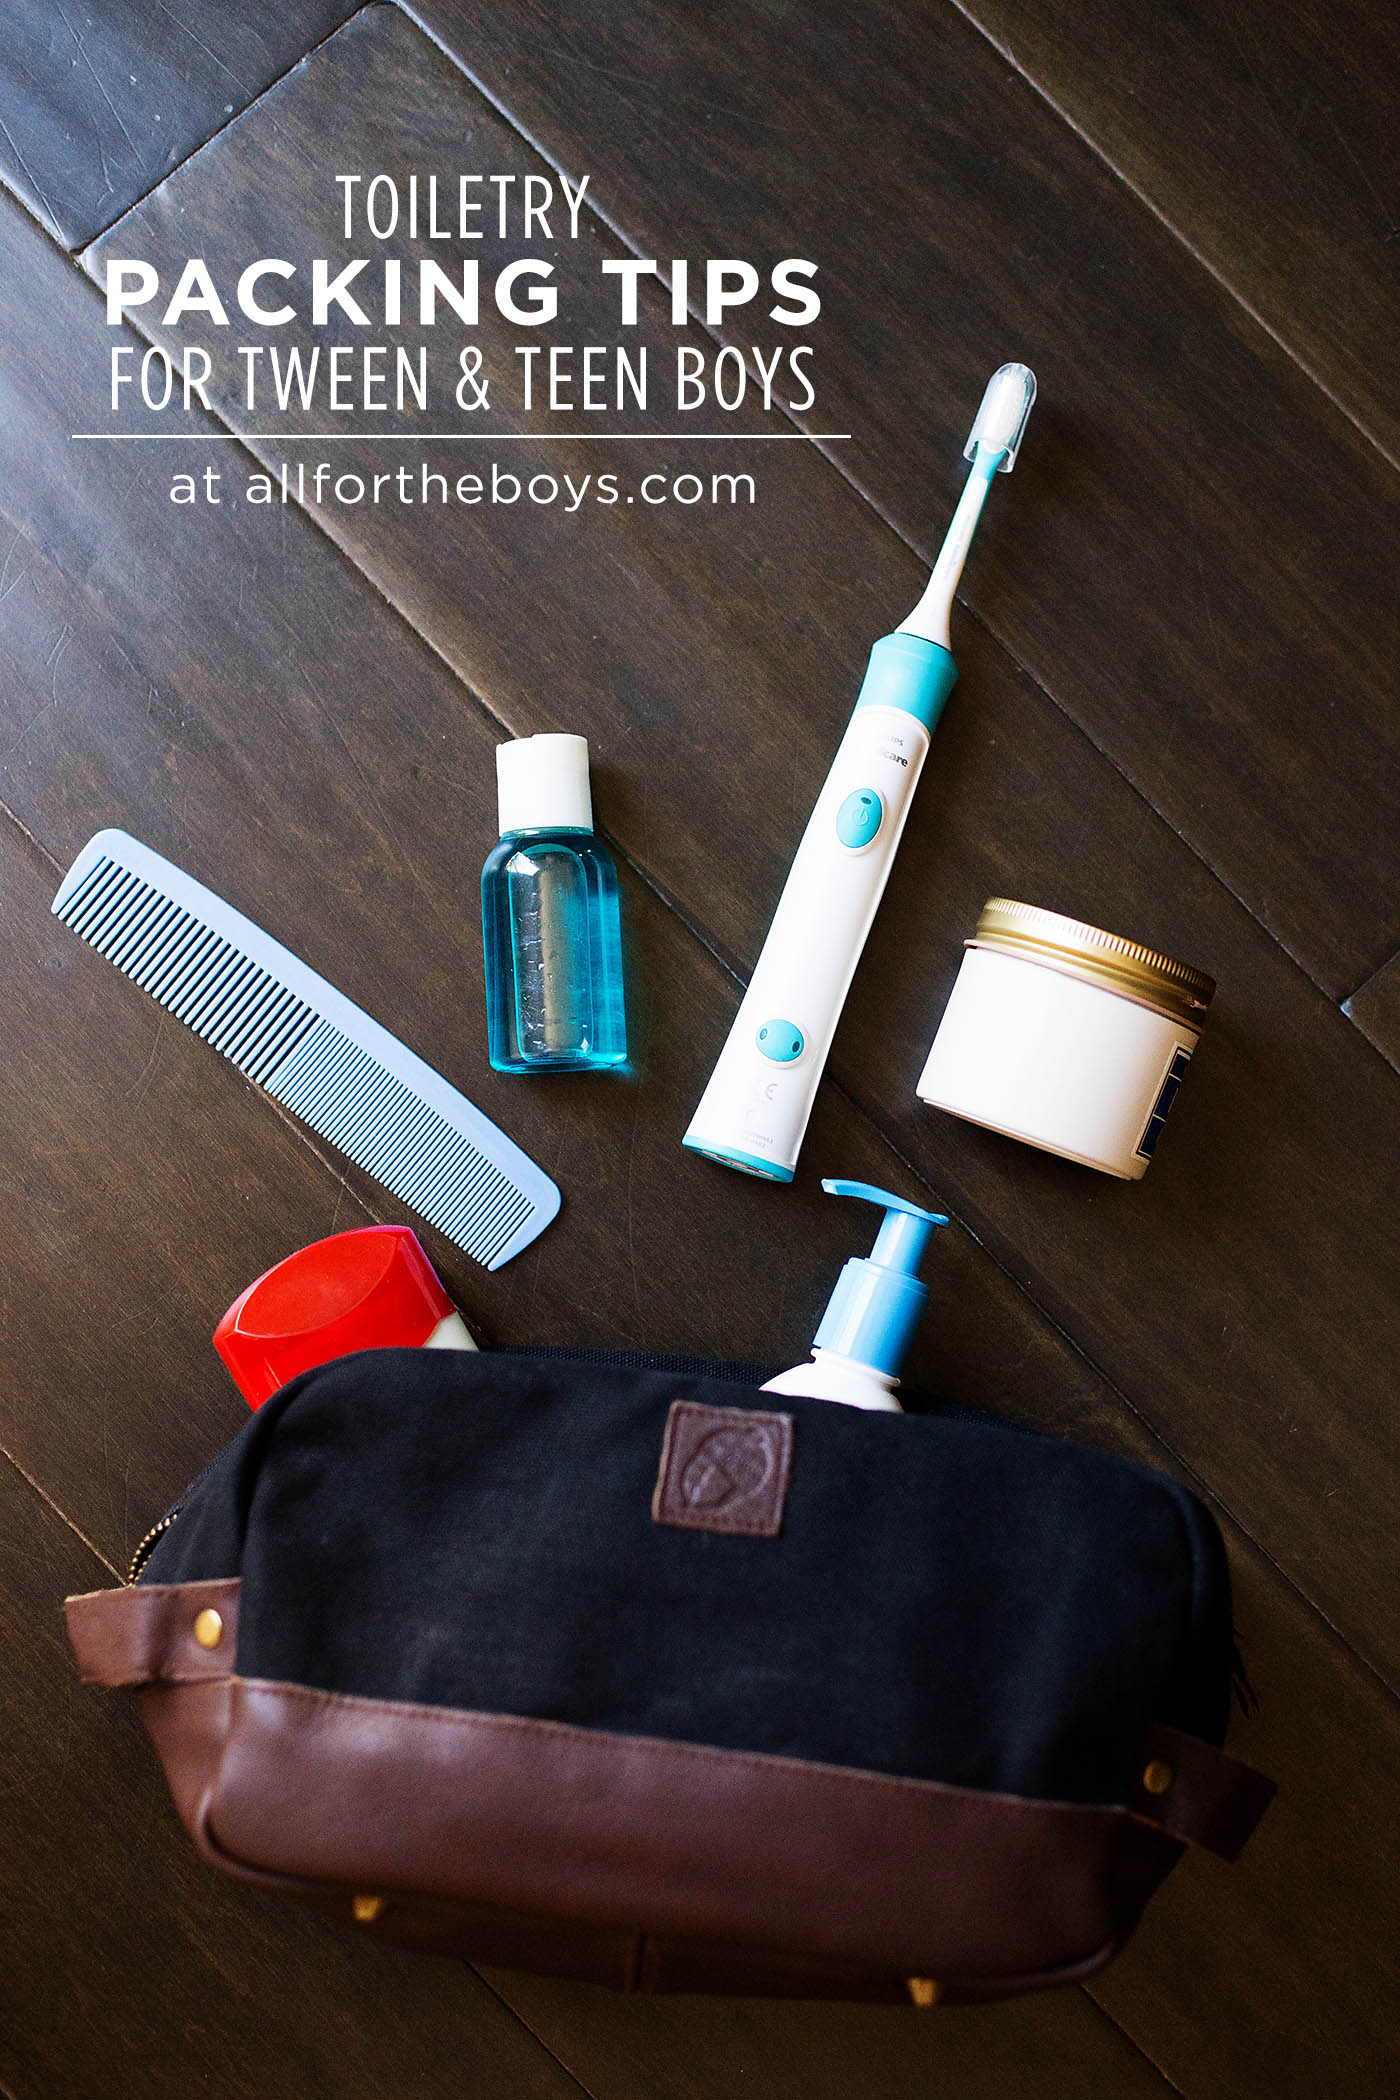 Toiletry packing tips for tween and teen boys